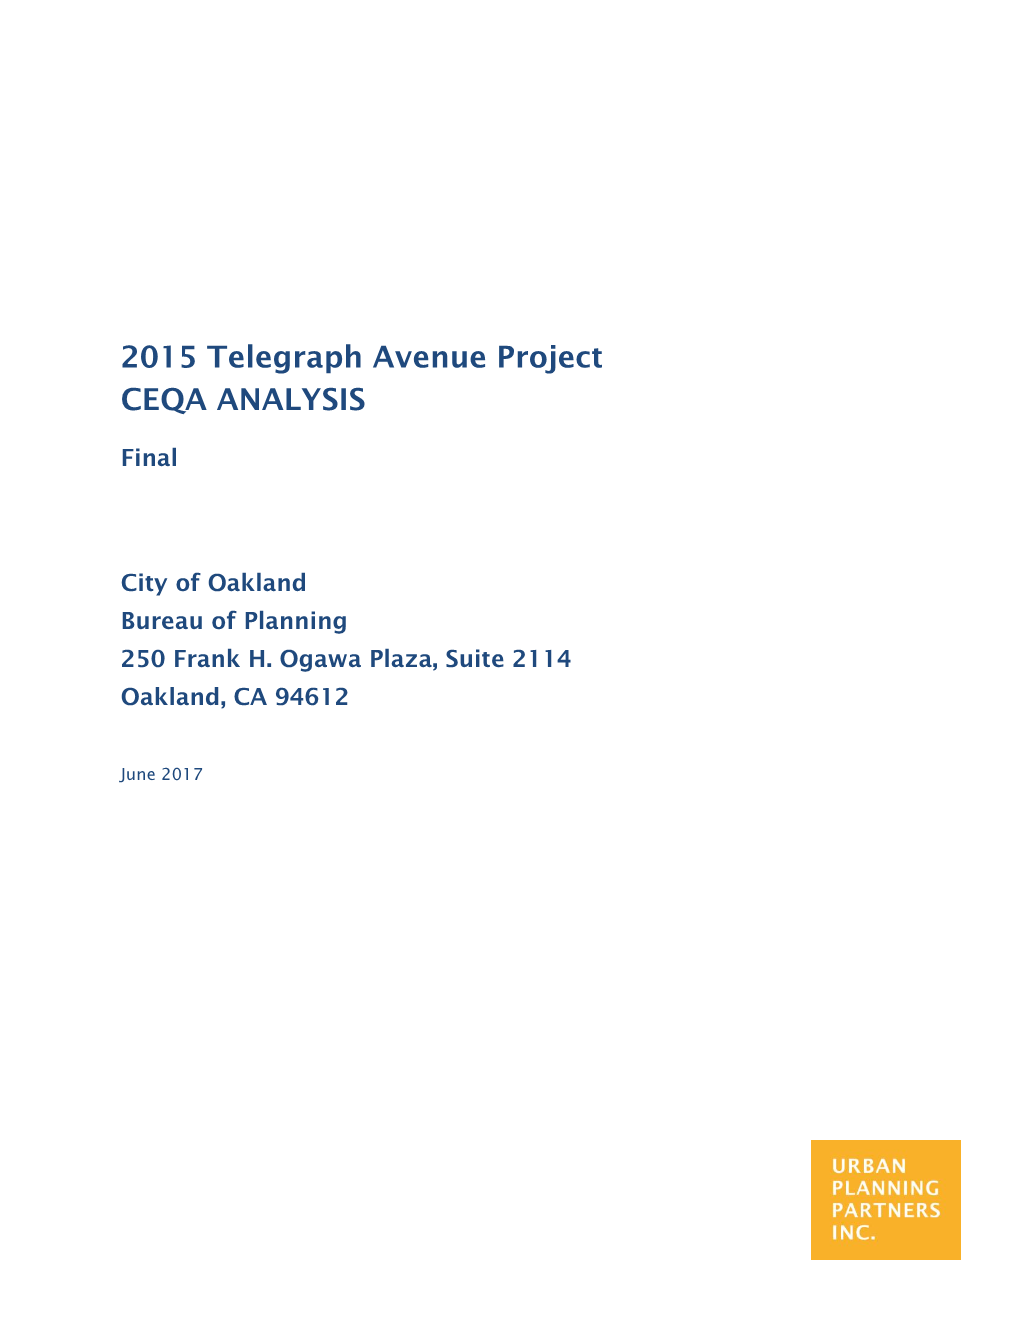 2015 Telegraph Avenue Project CEQA Analysis Uptown Mixed Use Project Boundaries 23Rd Street